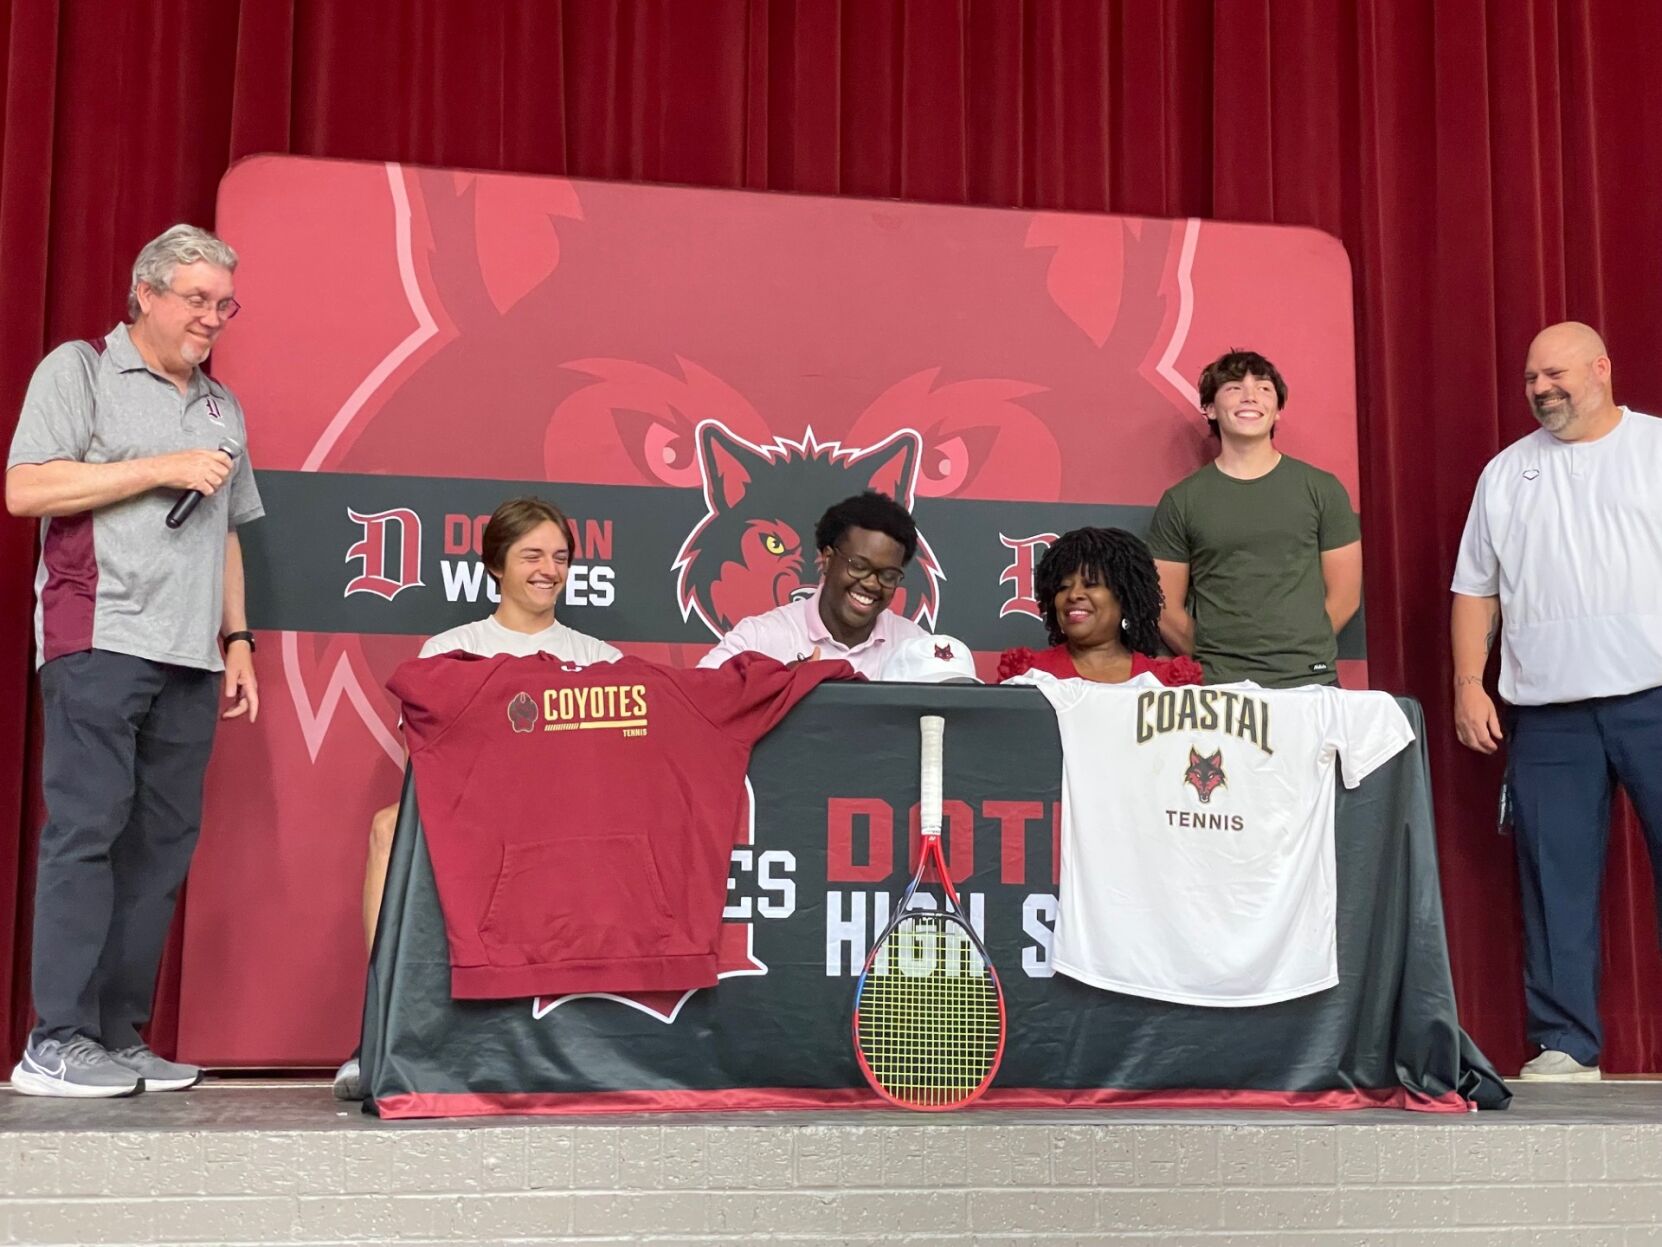 Seven Dothan Wolves sign athletic scholarships, with photos and comments